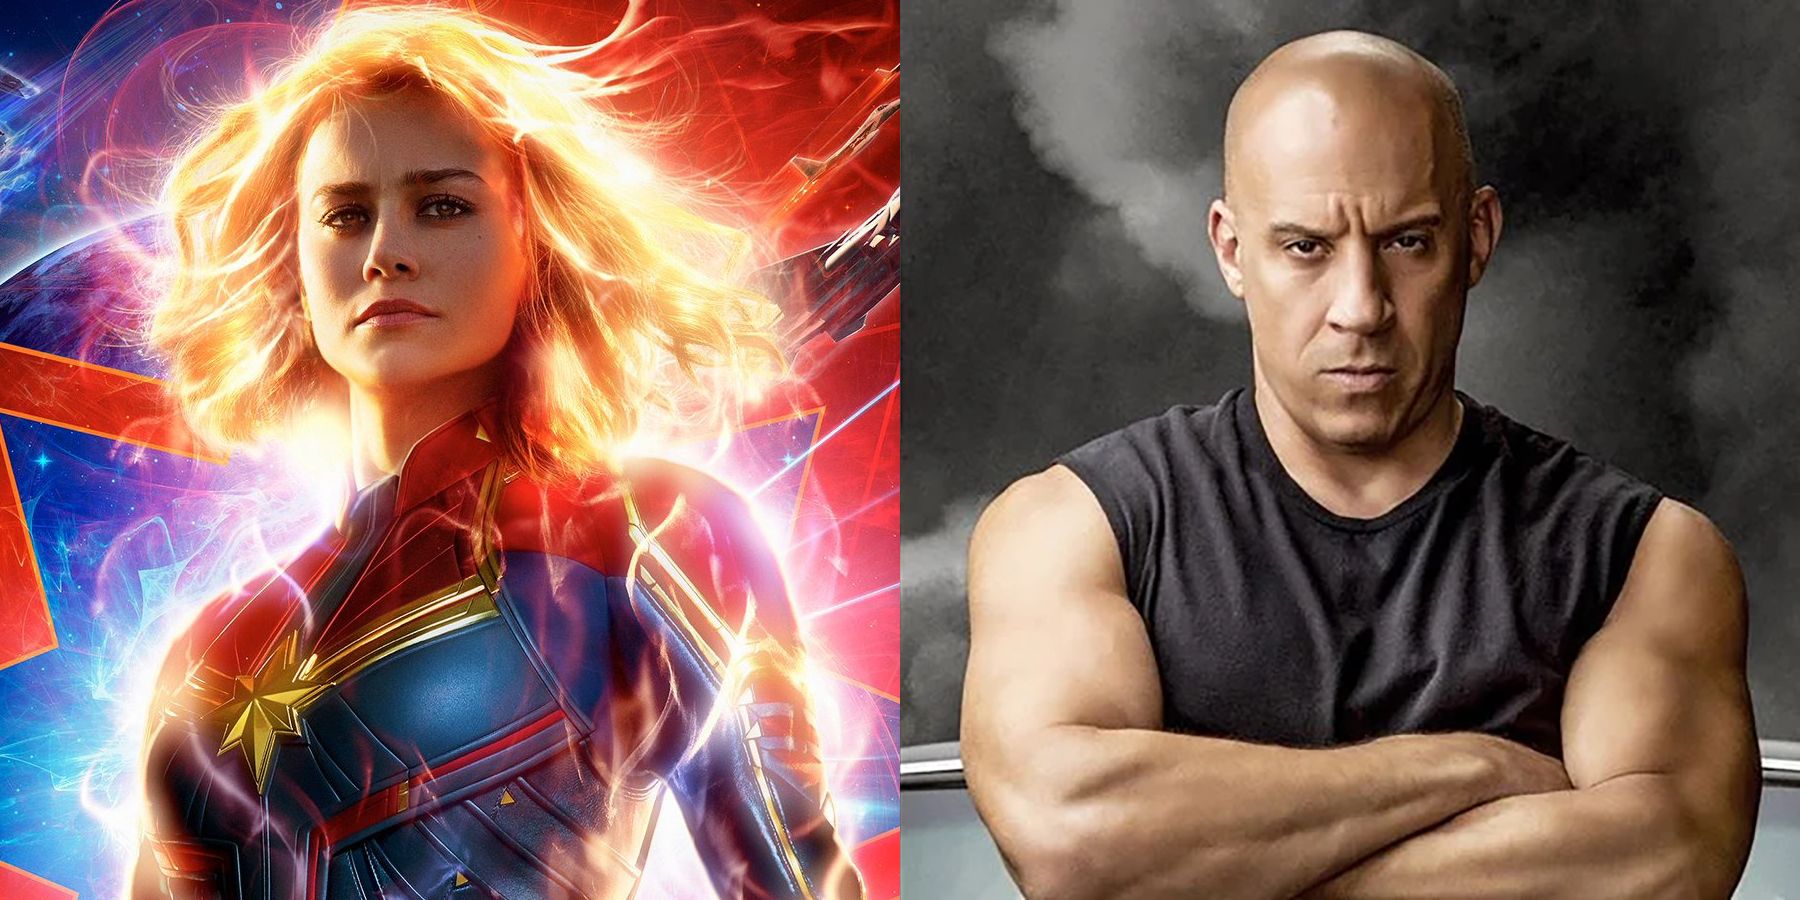 Fast and Furious 10 Vin Diesel Brie Larson